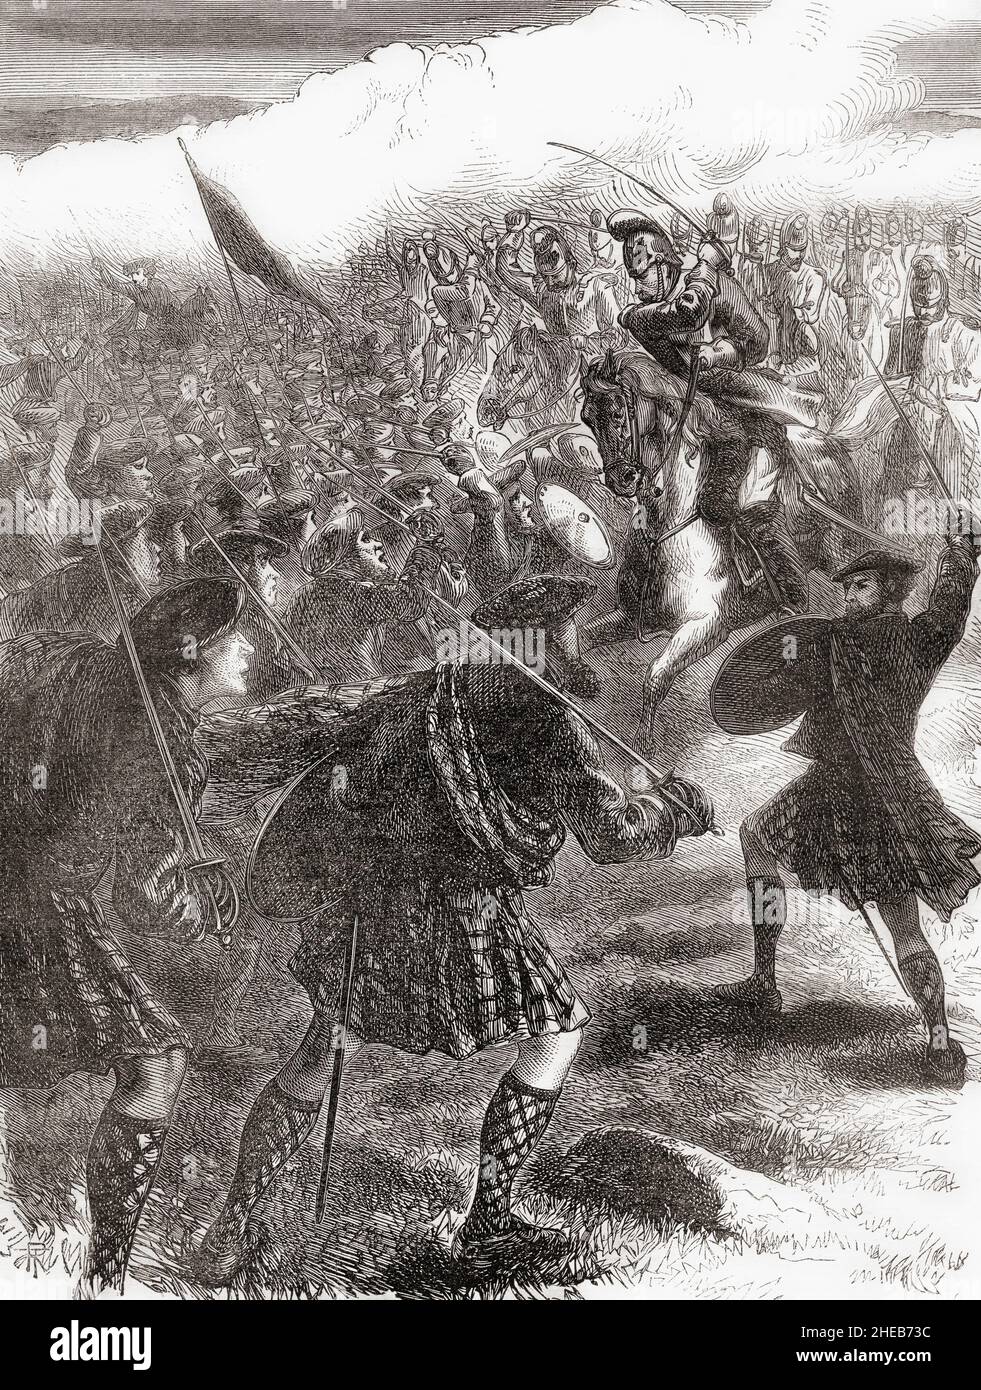 The Battle of Culloden, 16 April 1746, the final confrontation of the Jacobite rising of 1745.  From Cassell's Illustrated History of England, published c.1890. Stock Photo